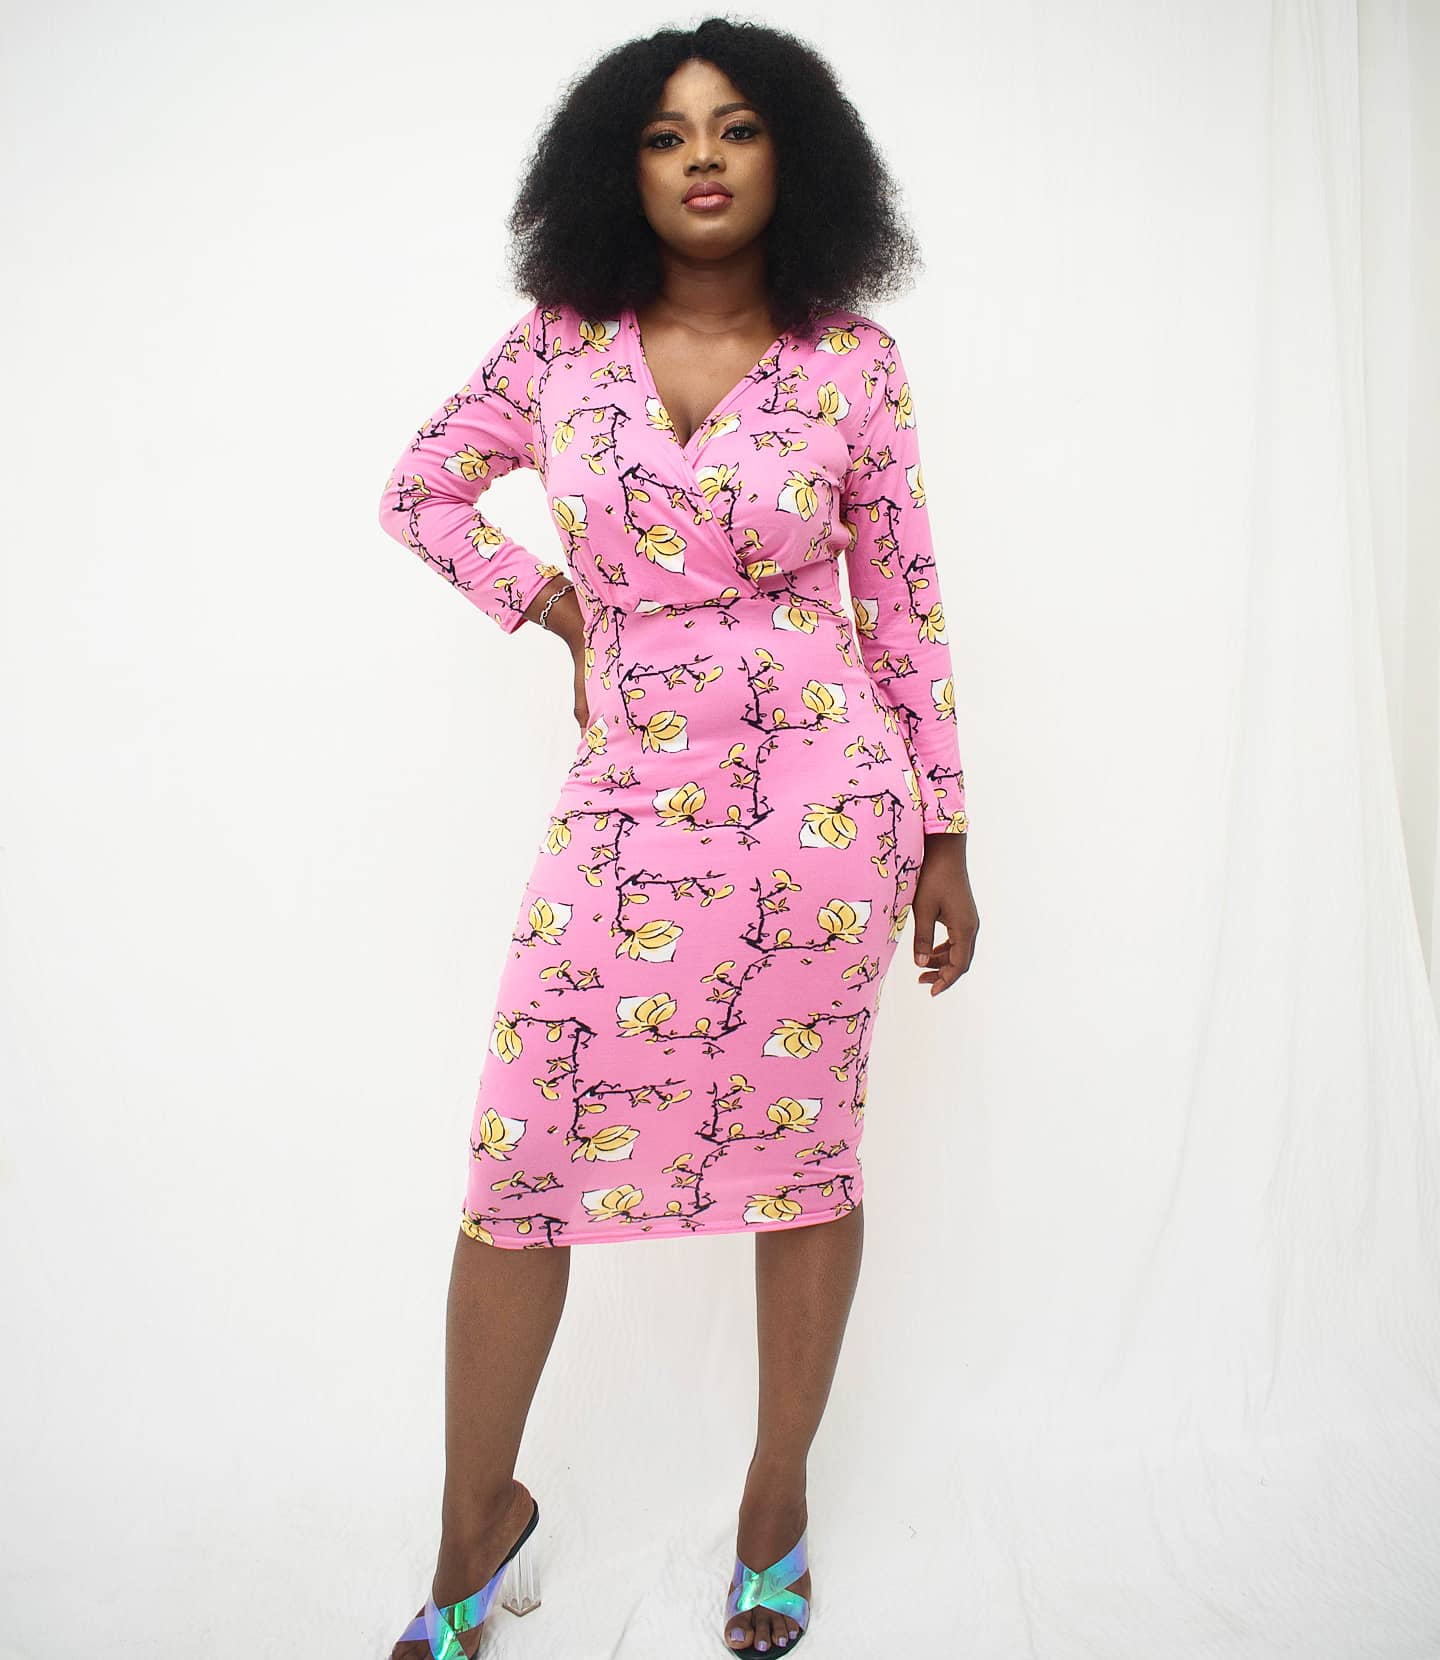 PINK FLORAL BODYCON DRESS - Midrra